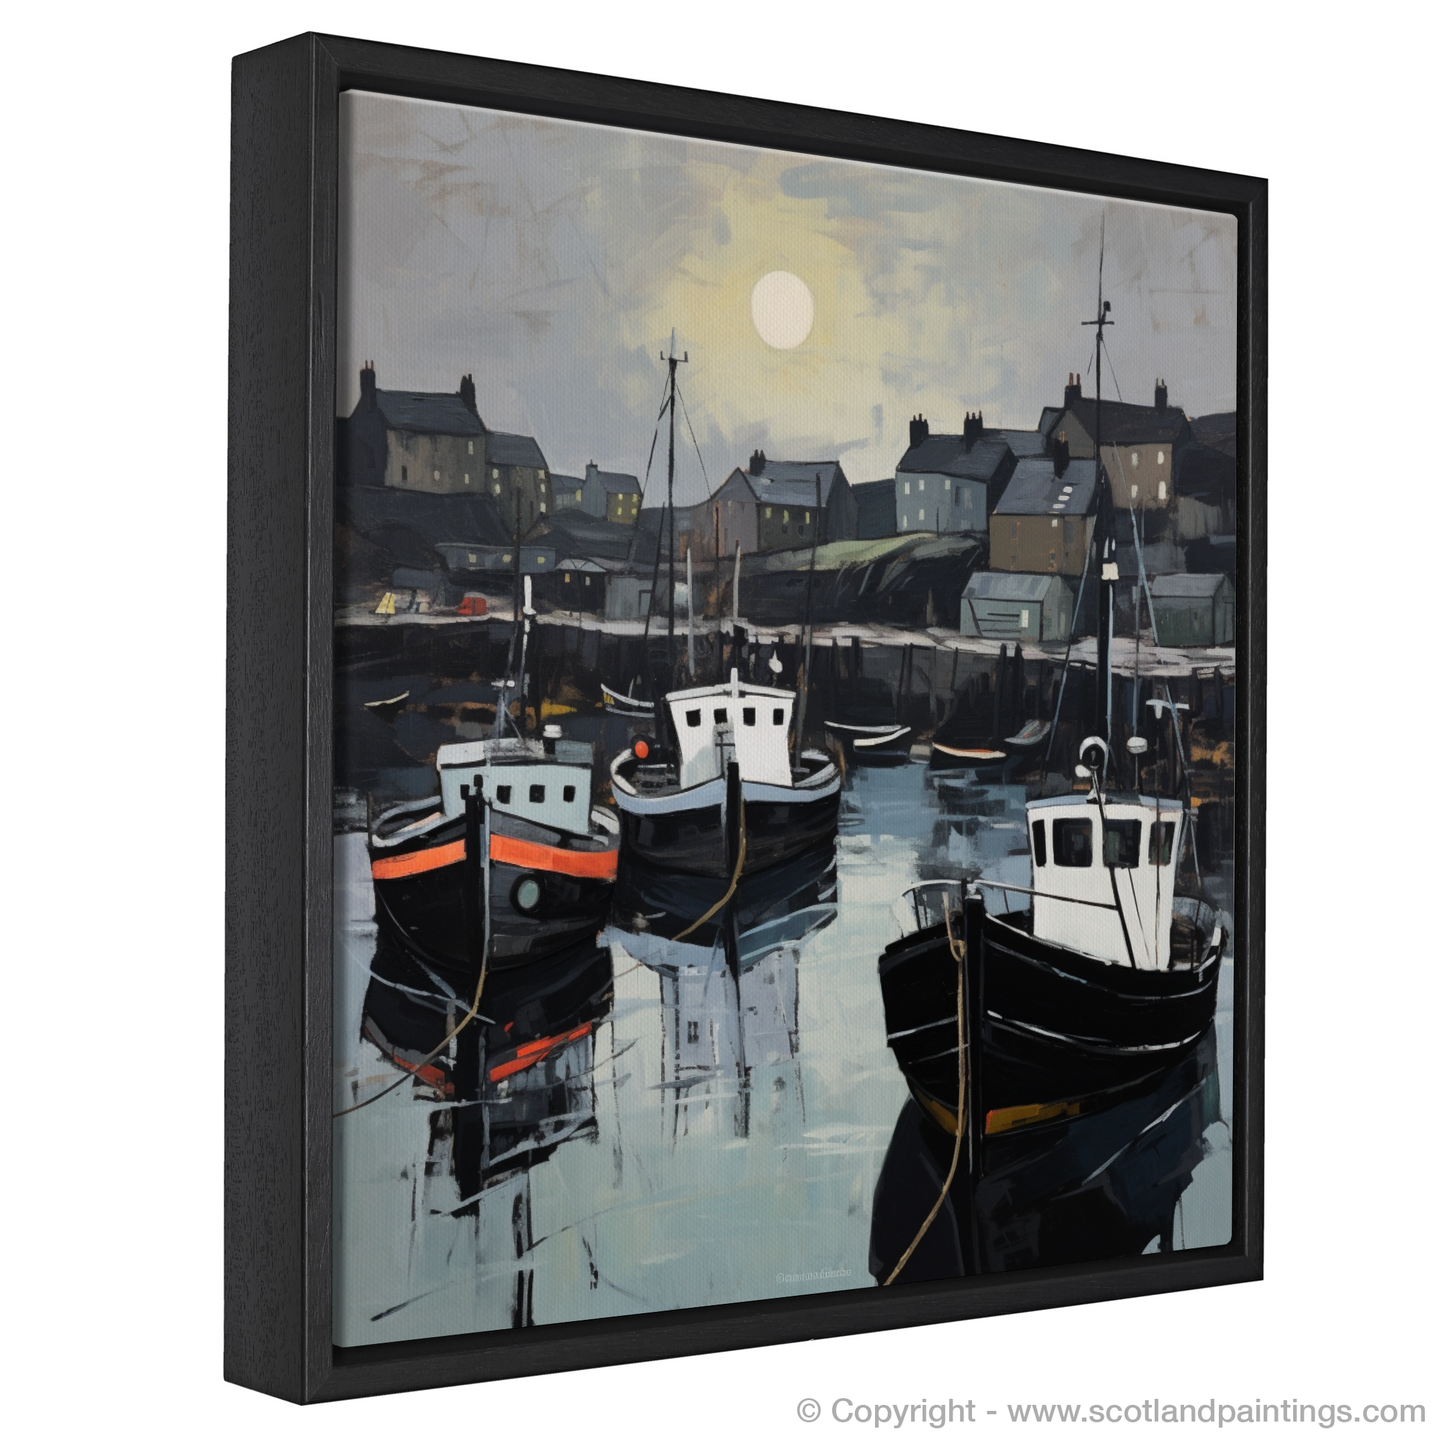 Painting and Art Print of Eyemouth Harbour entitled "Harbour Hues: An Expressionist Ode to Eyemouth".